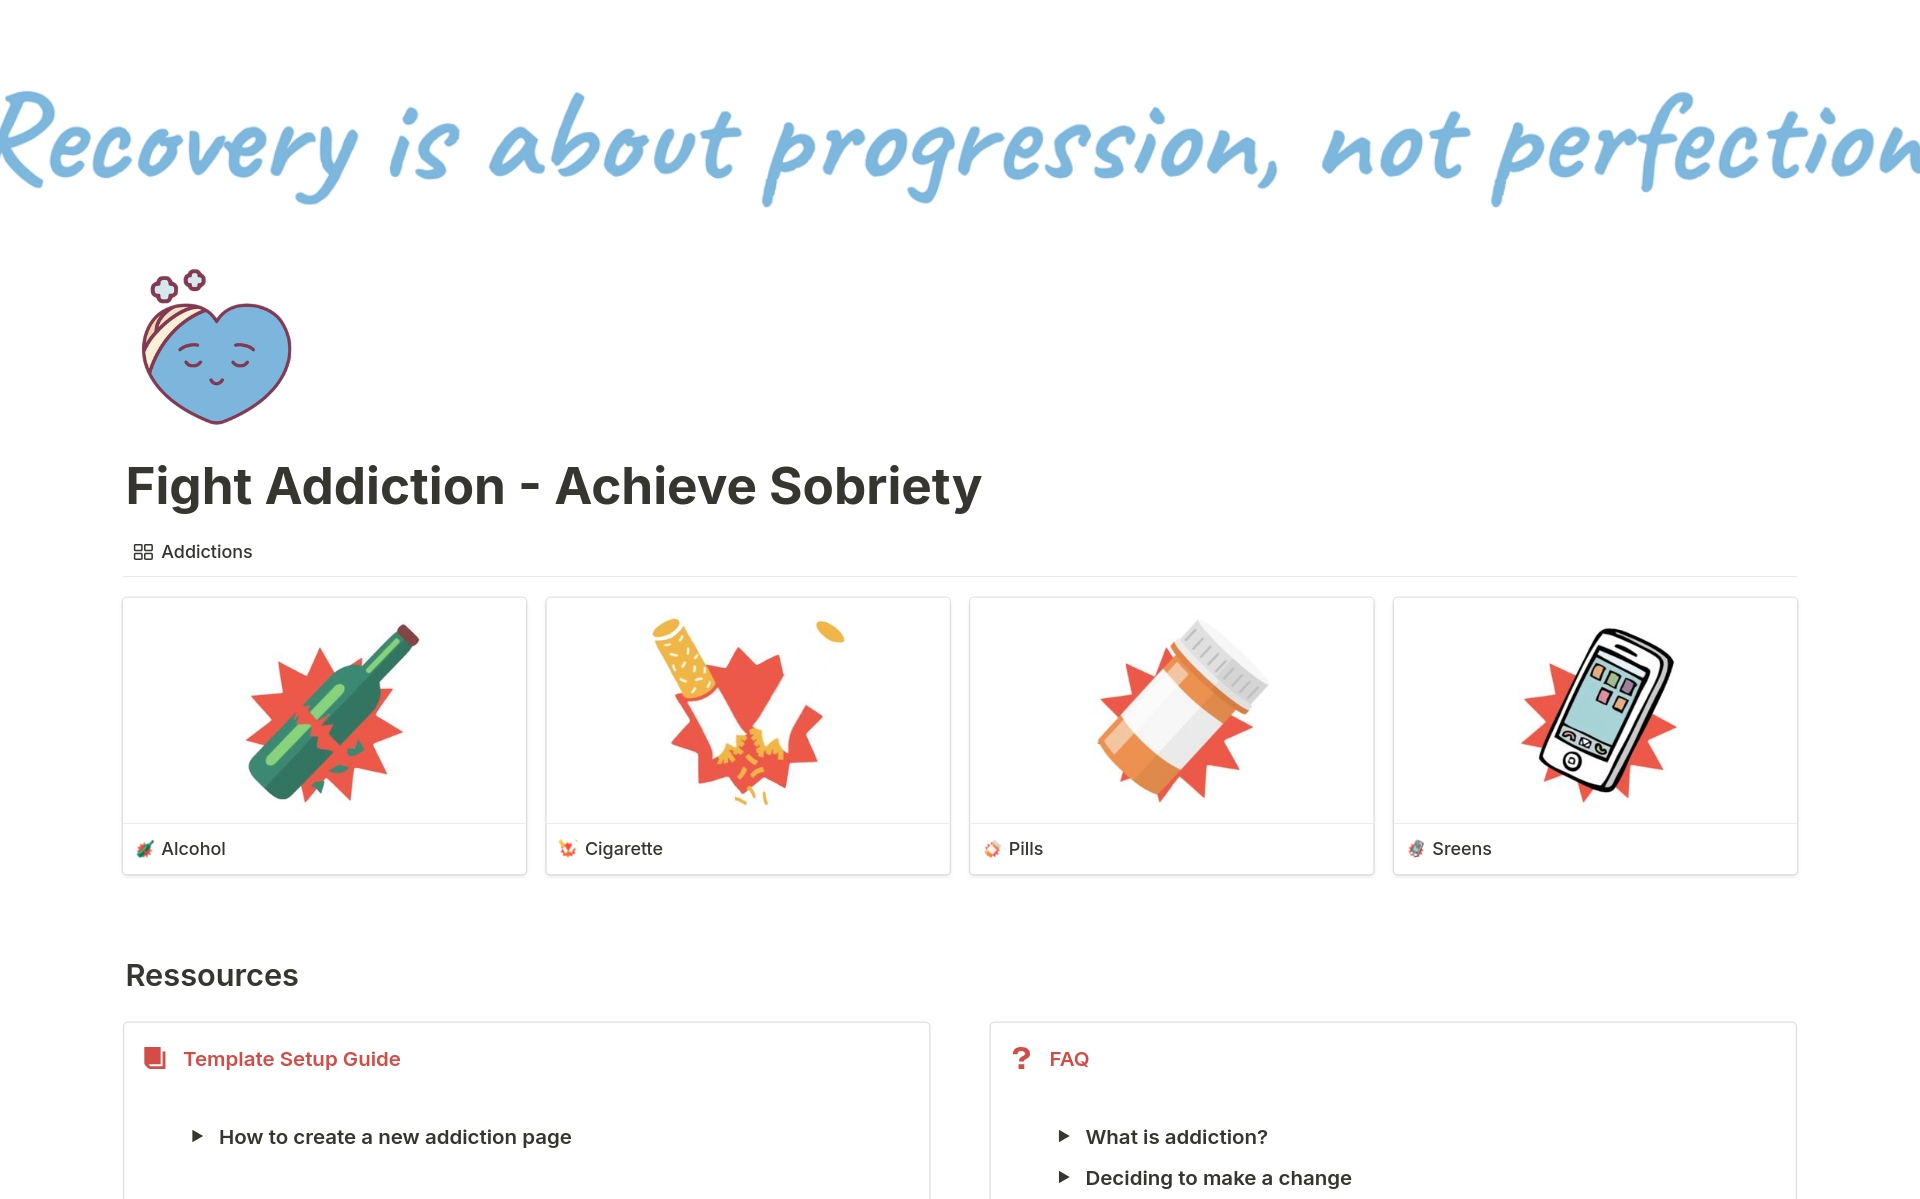 Fight Addiction - Achieve Sobriety
Empower your sobriety journey with the all-in-one Notion template. Track progress, identify motivations, manage symptoms, and stay supported. Customize it to your needs and stay organized and motivated every step of the way.